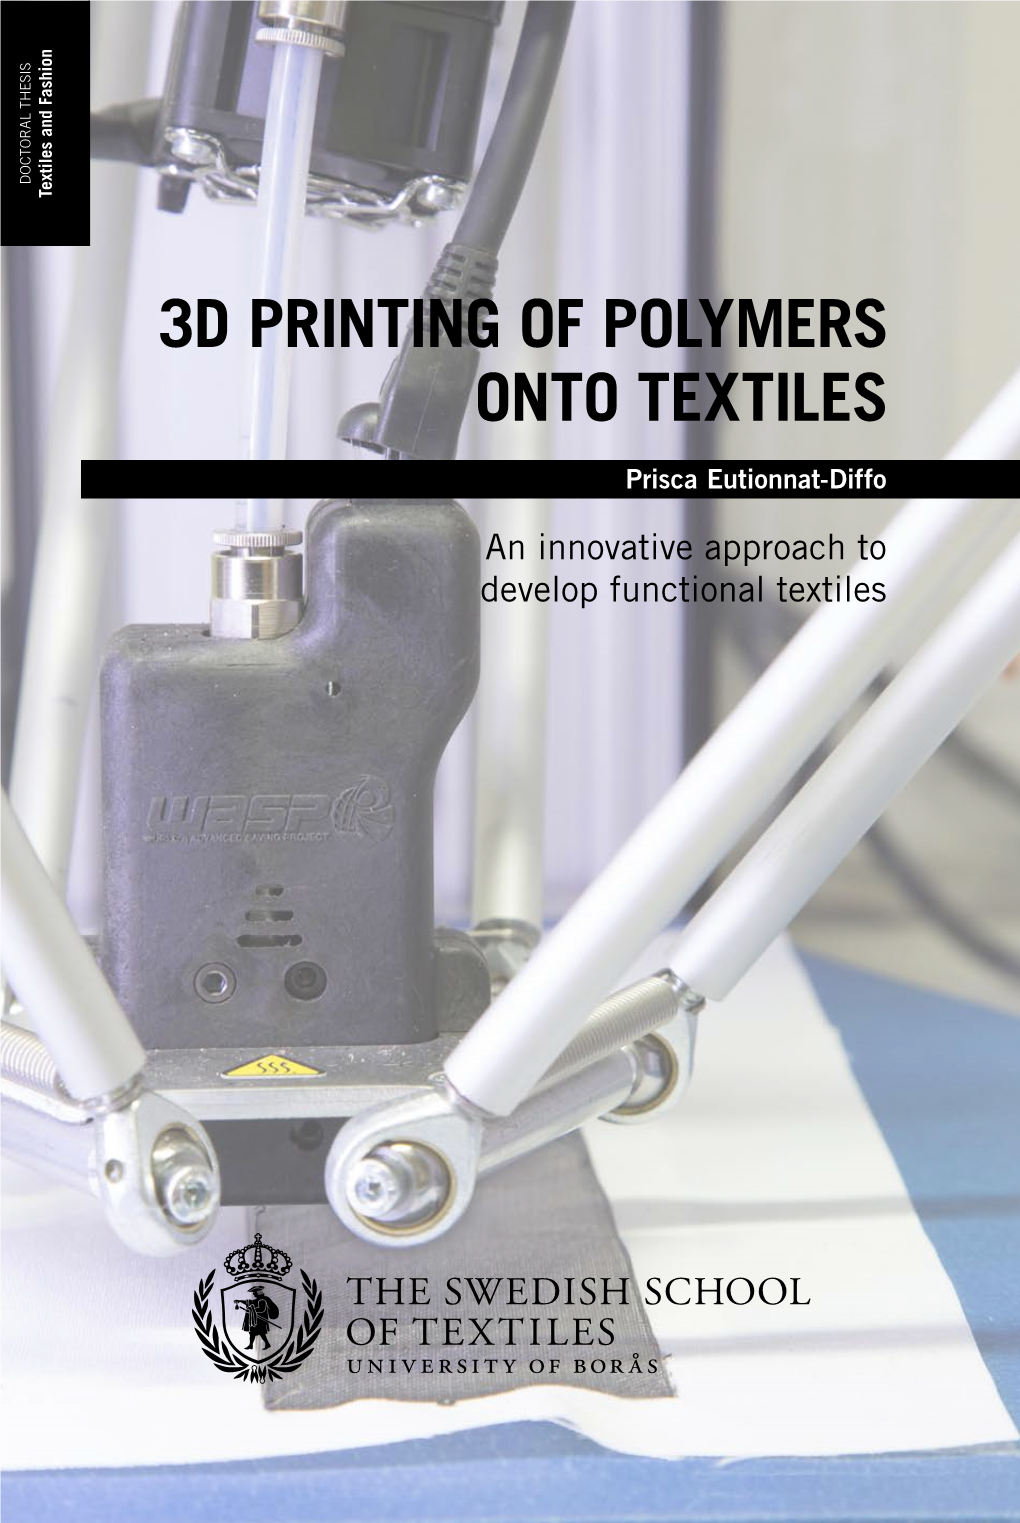 3D Printing of Polymers Onto Textiles